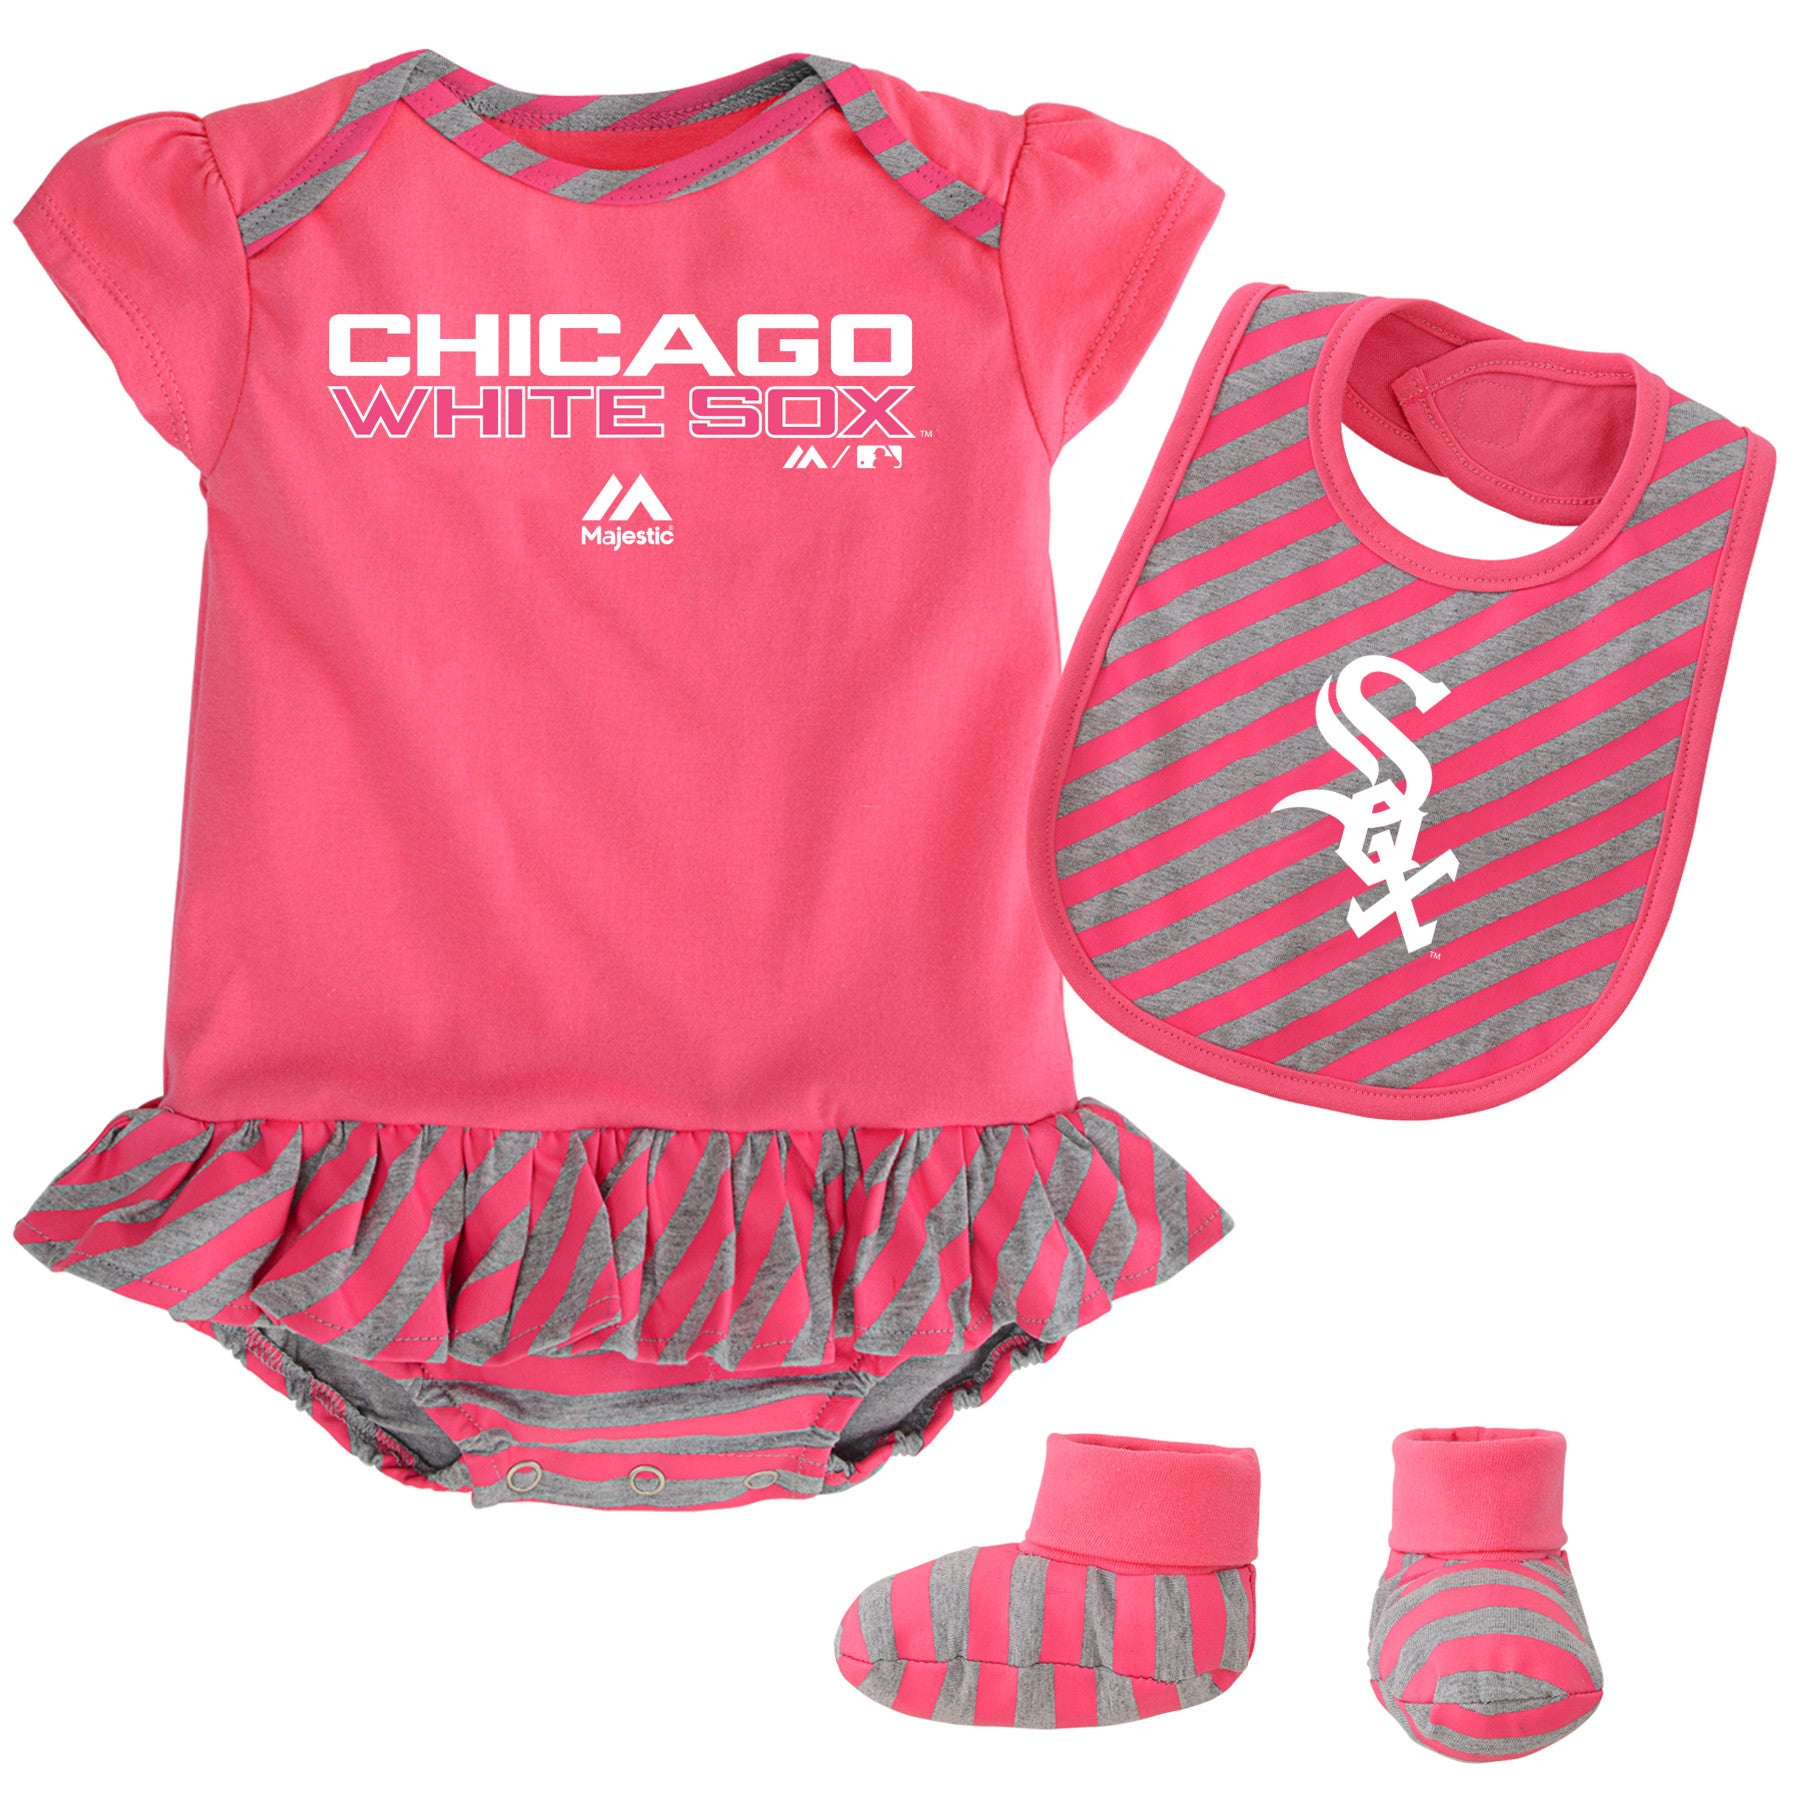 Chicago White Sox Baby Outfit